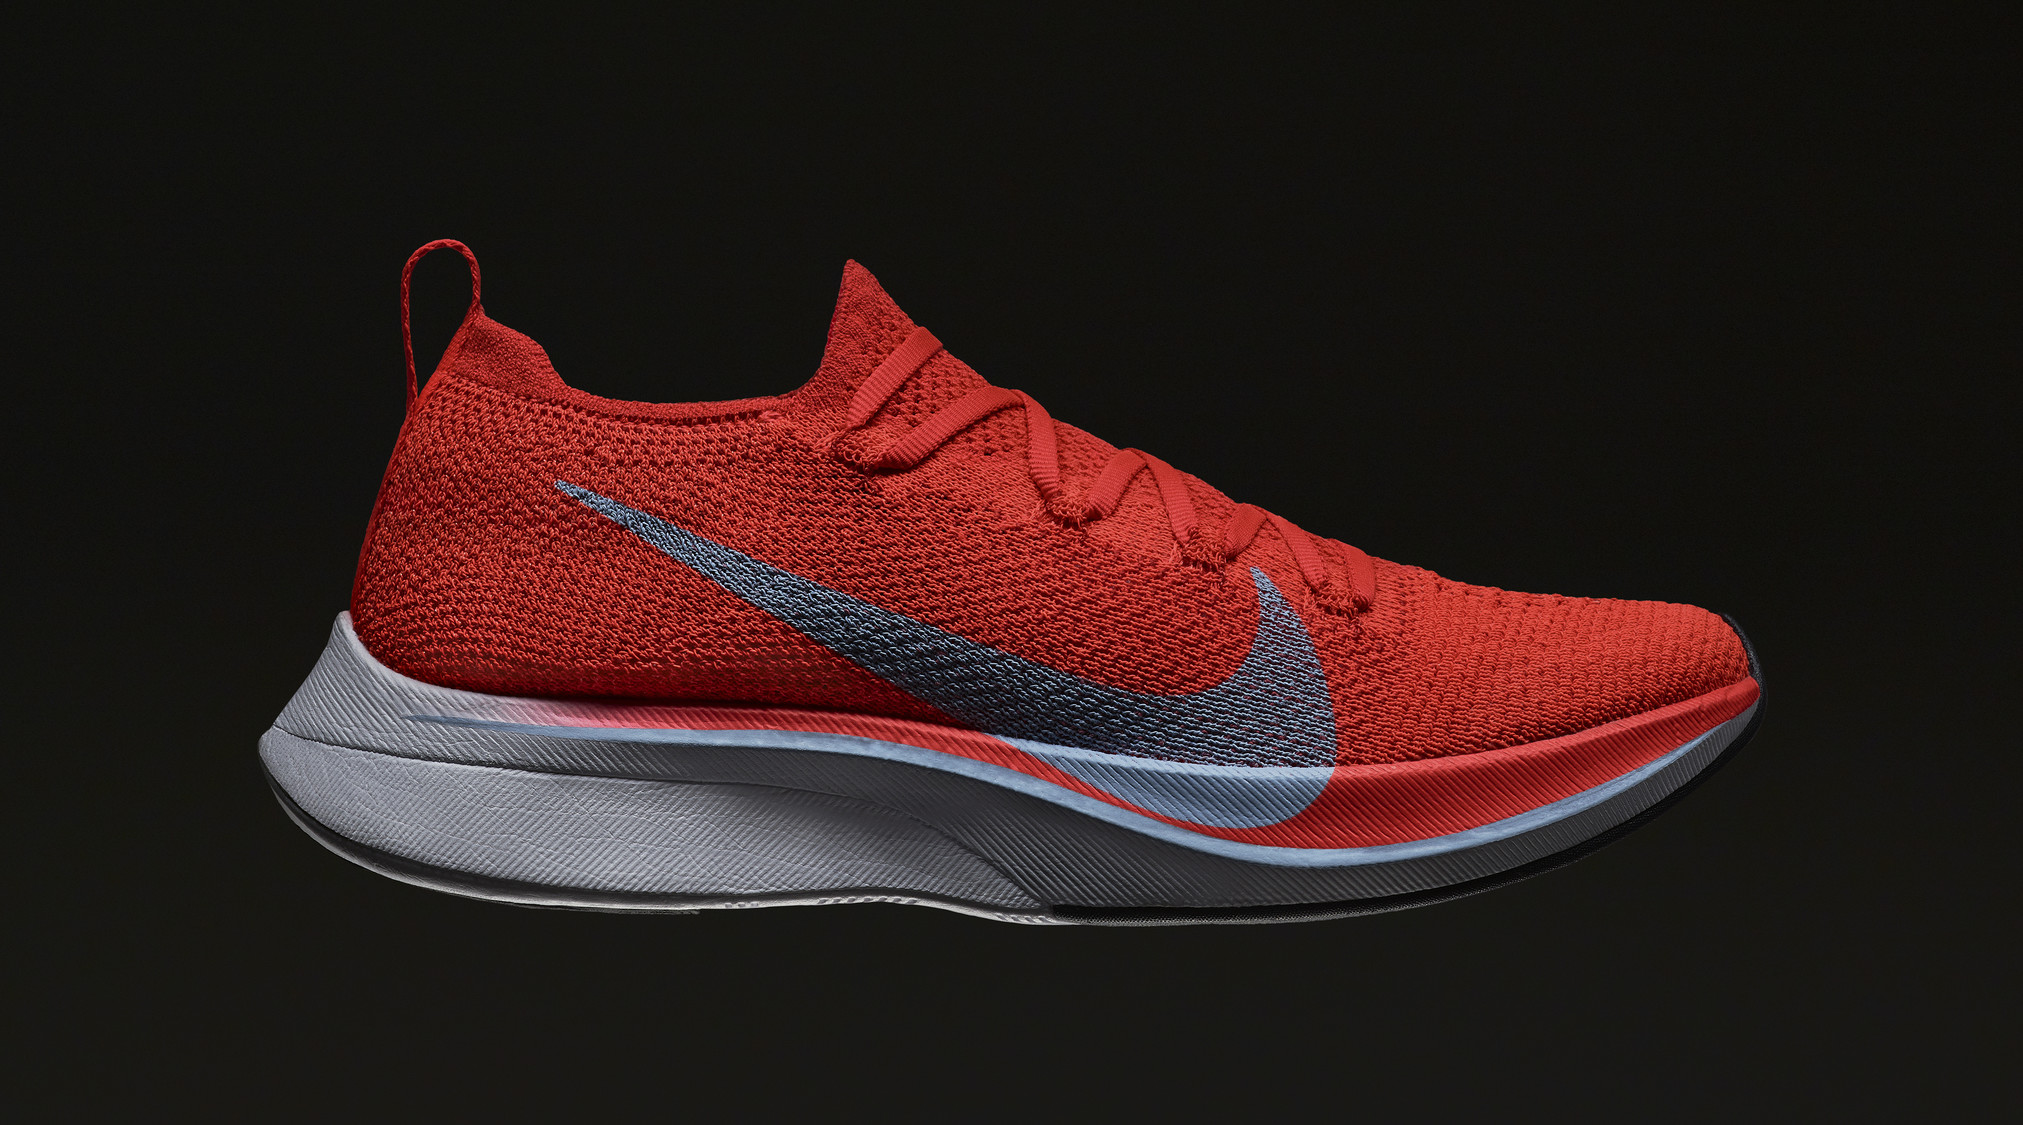 medianoche Desviación Anual Nike Adds Flyknit to Two of Its High Performance Runners | Complex